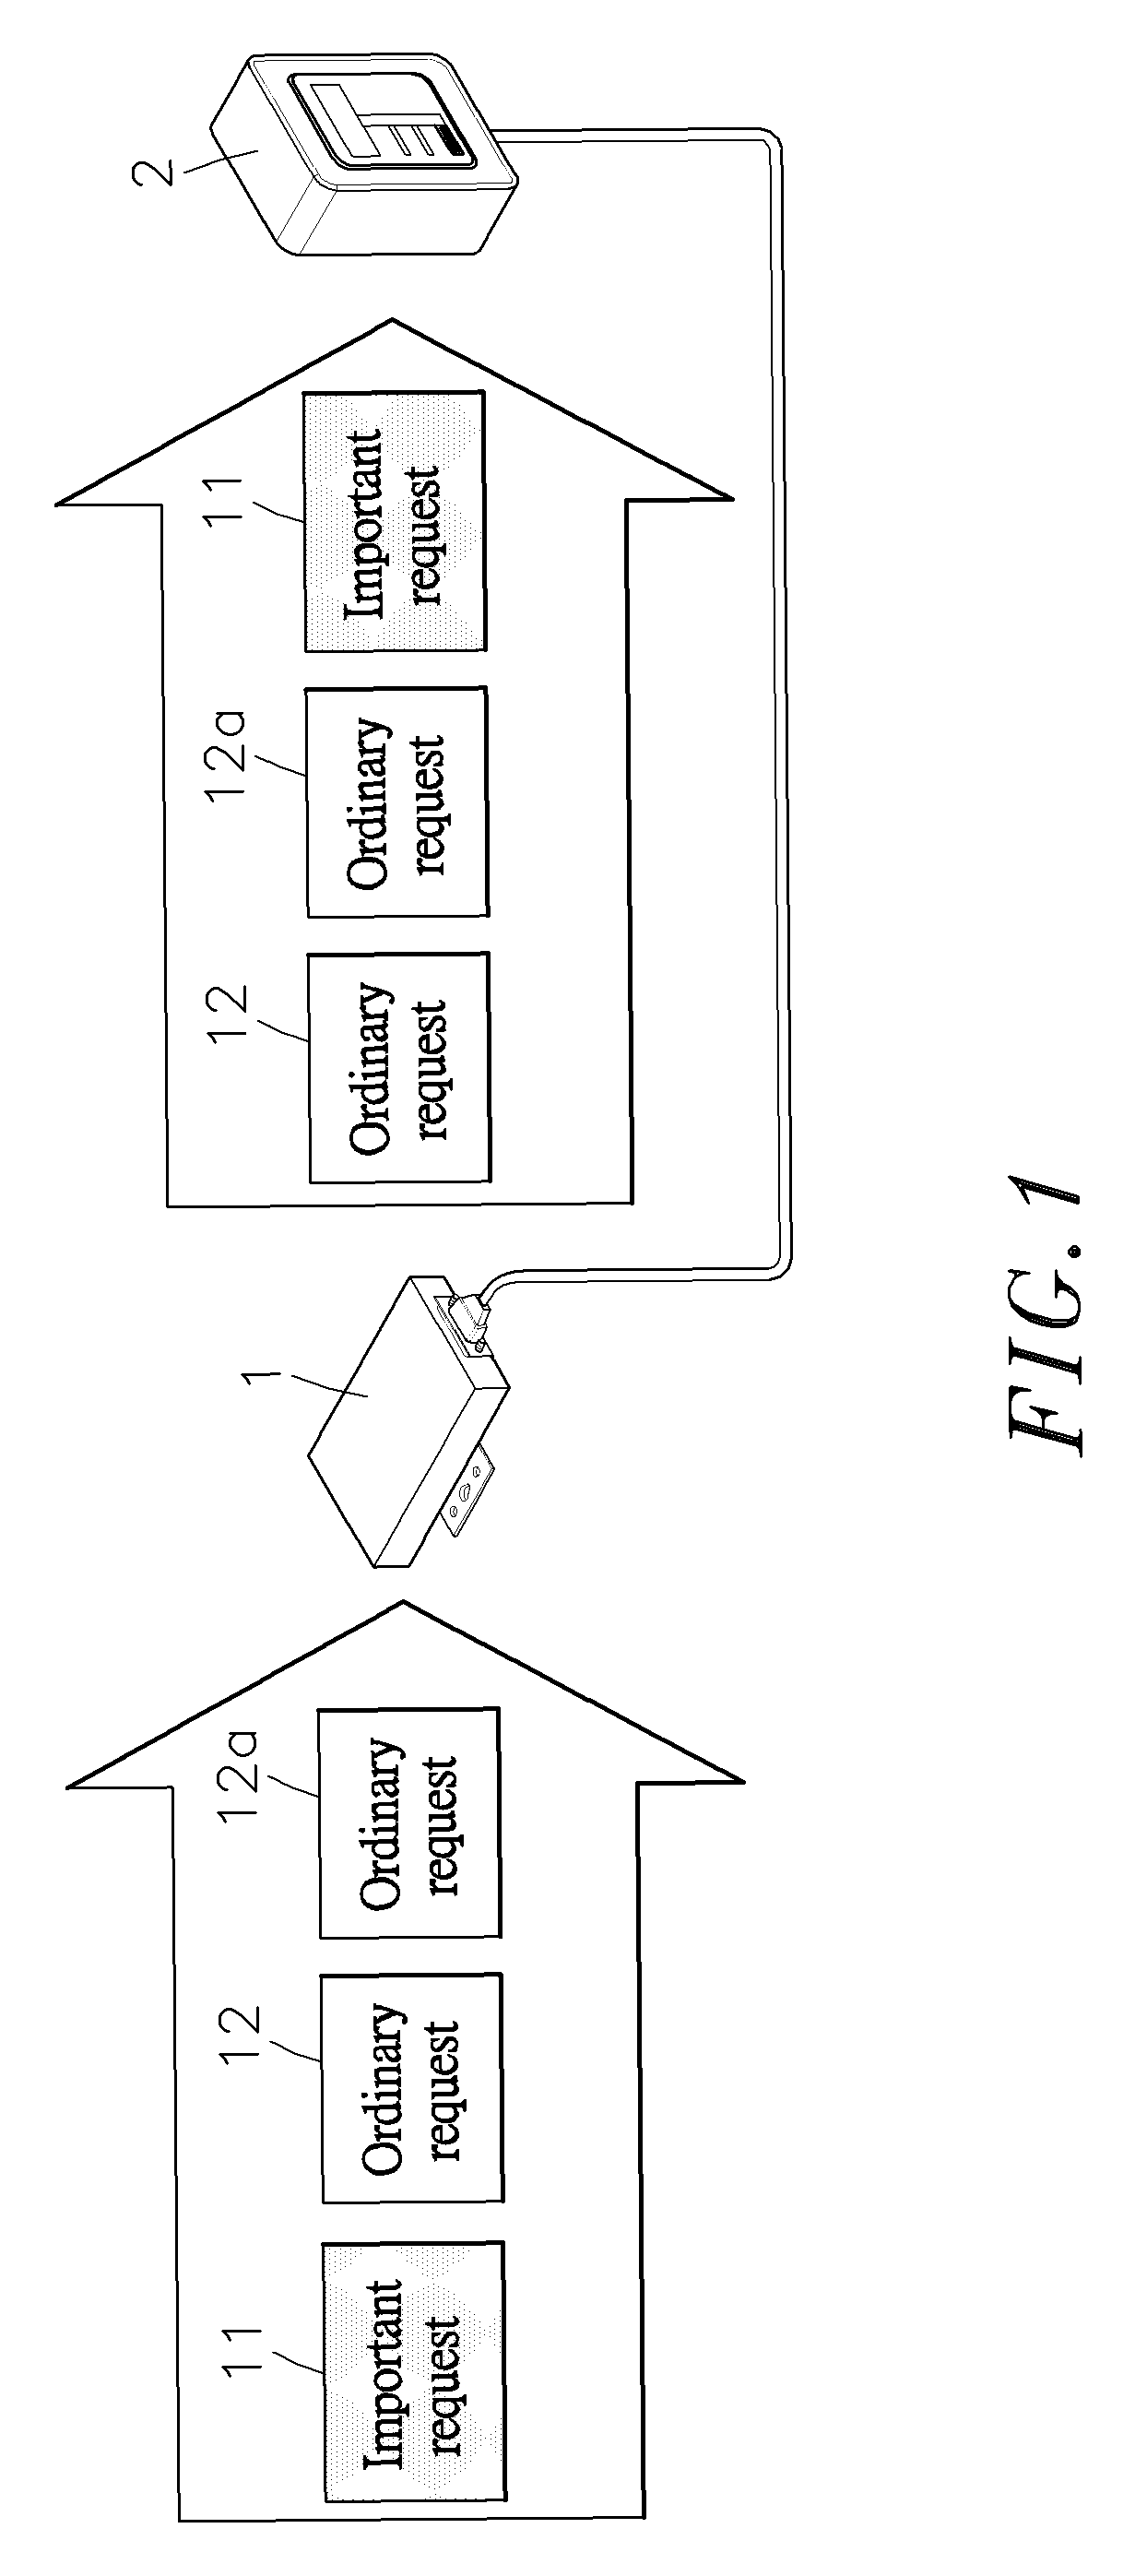 Method of determining request transmission priority subject to request channel and transmitting request subject to such request transmission priority in application of fieldbus communication framework